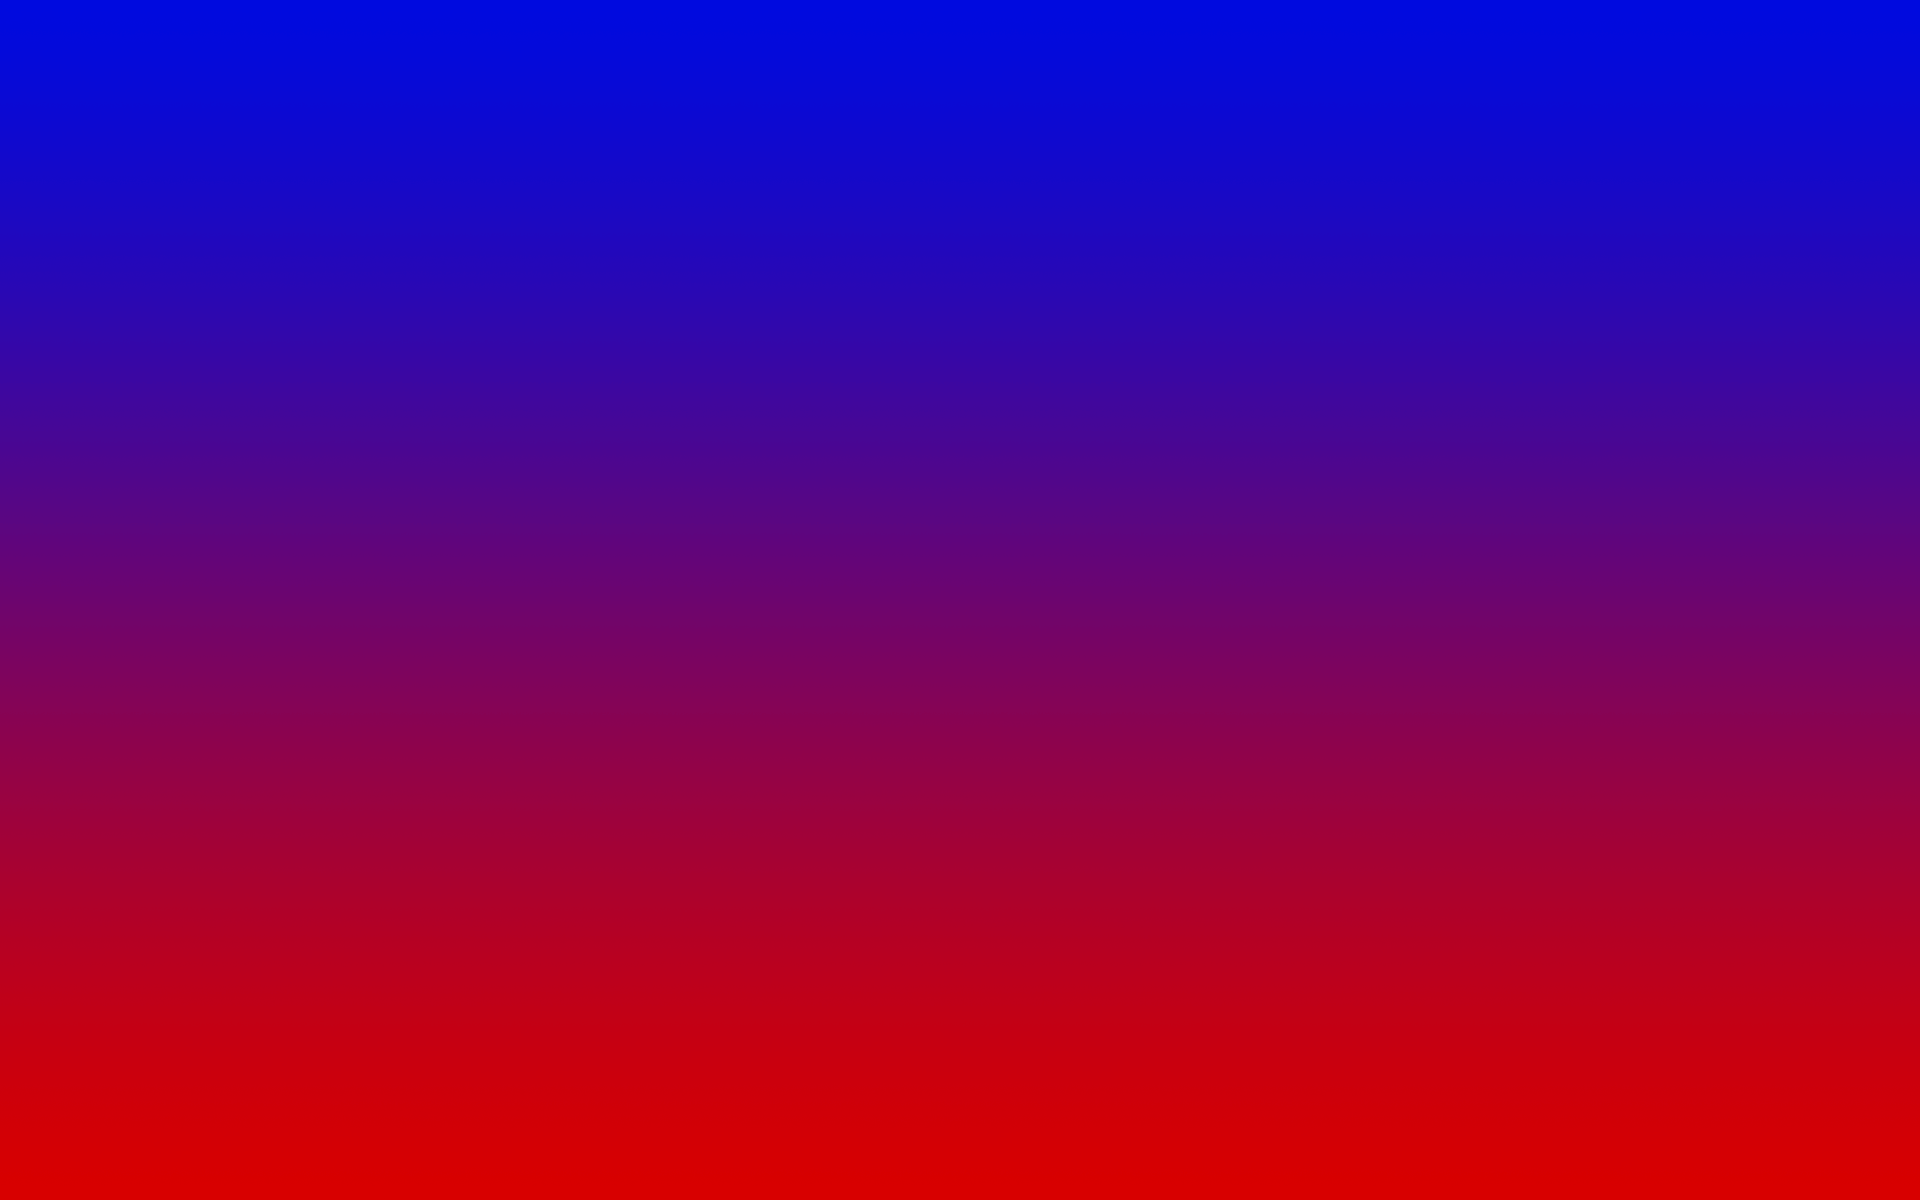 Blue and Red Gradient Wallpaper 58835 1920x1200 px